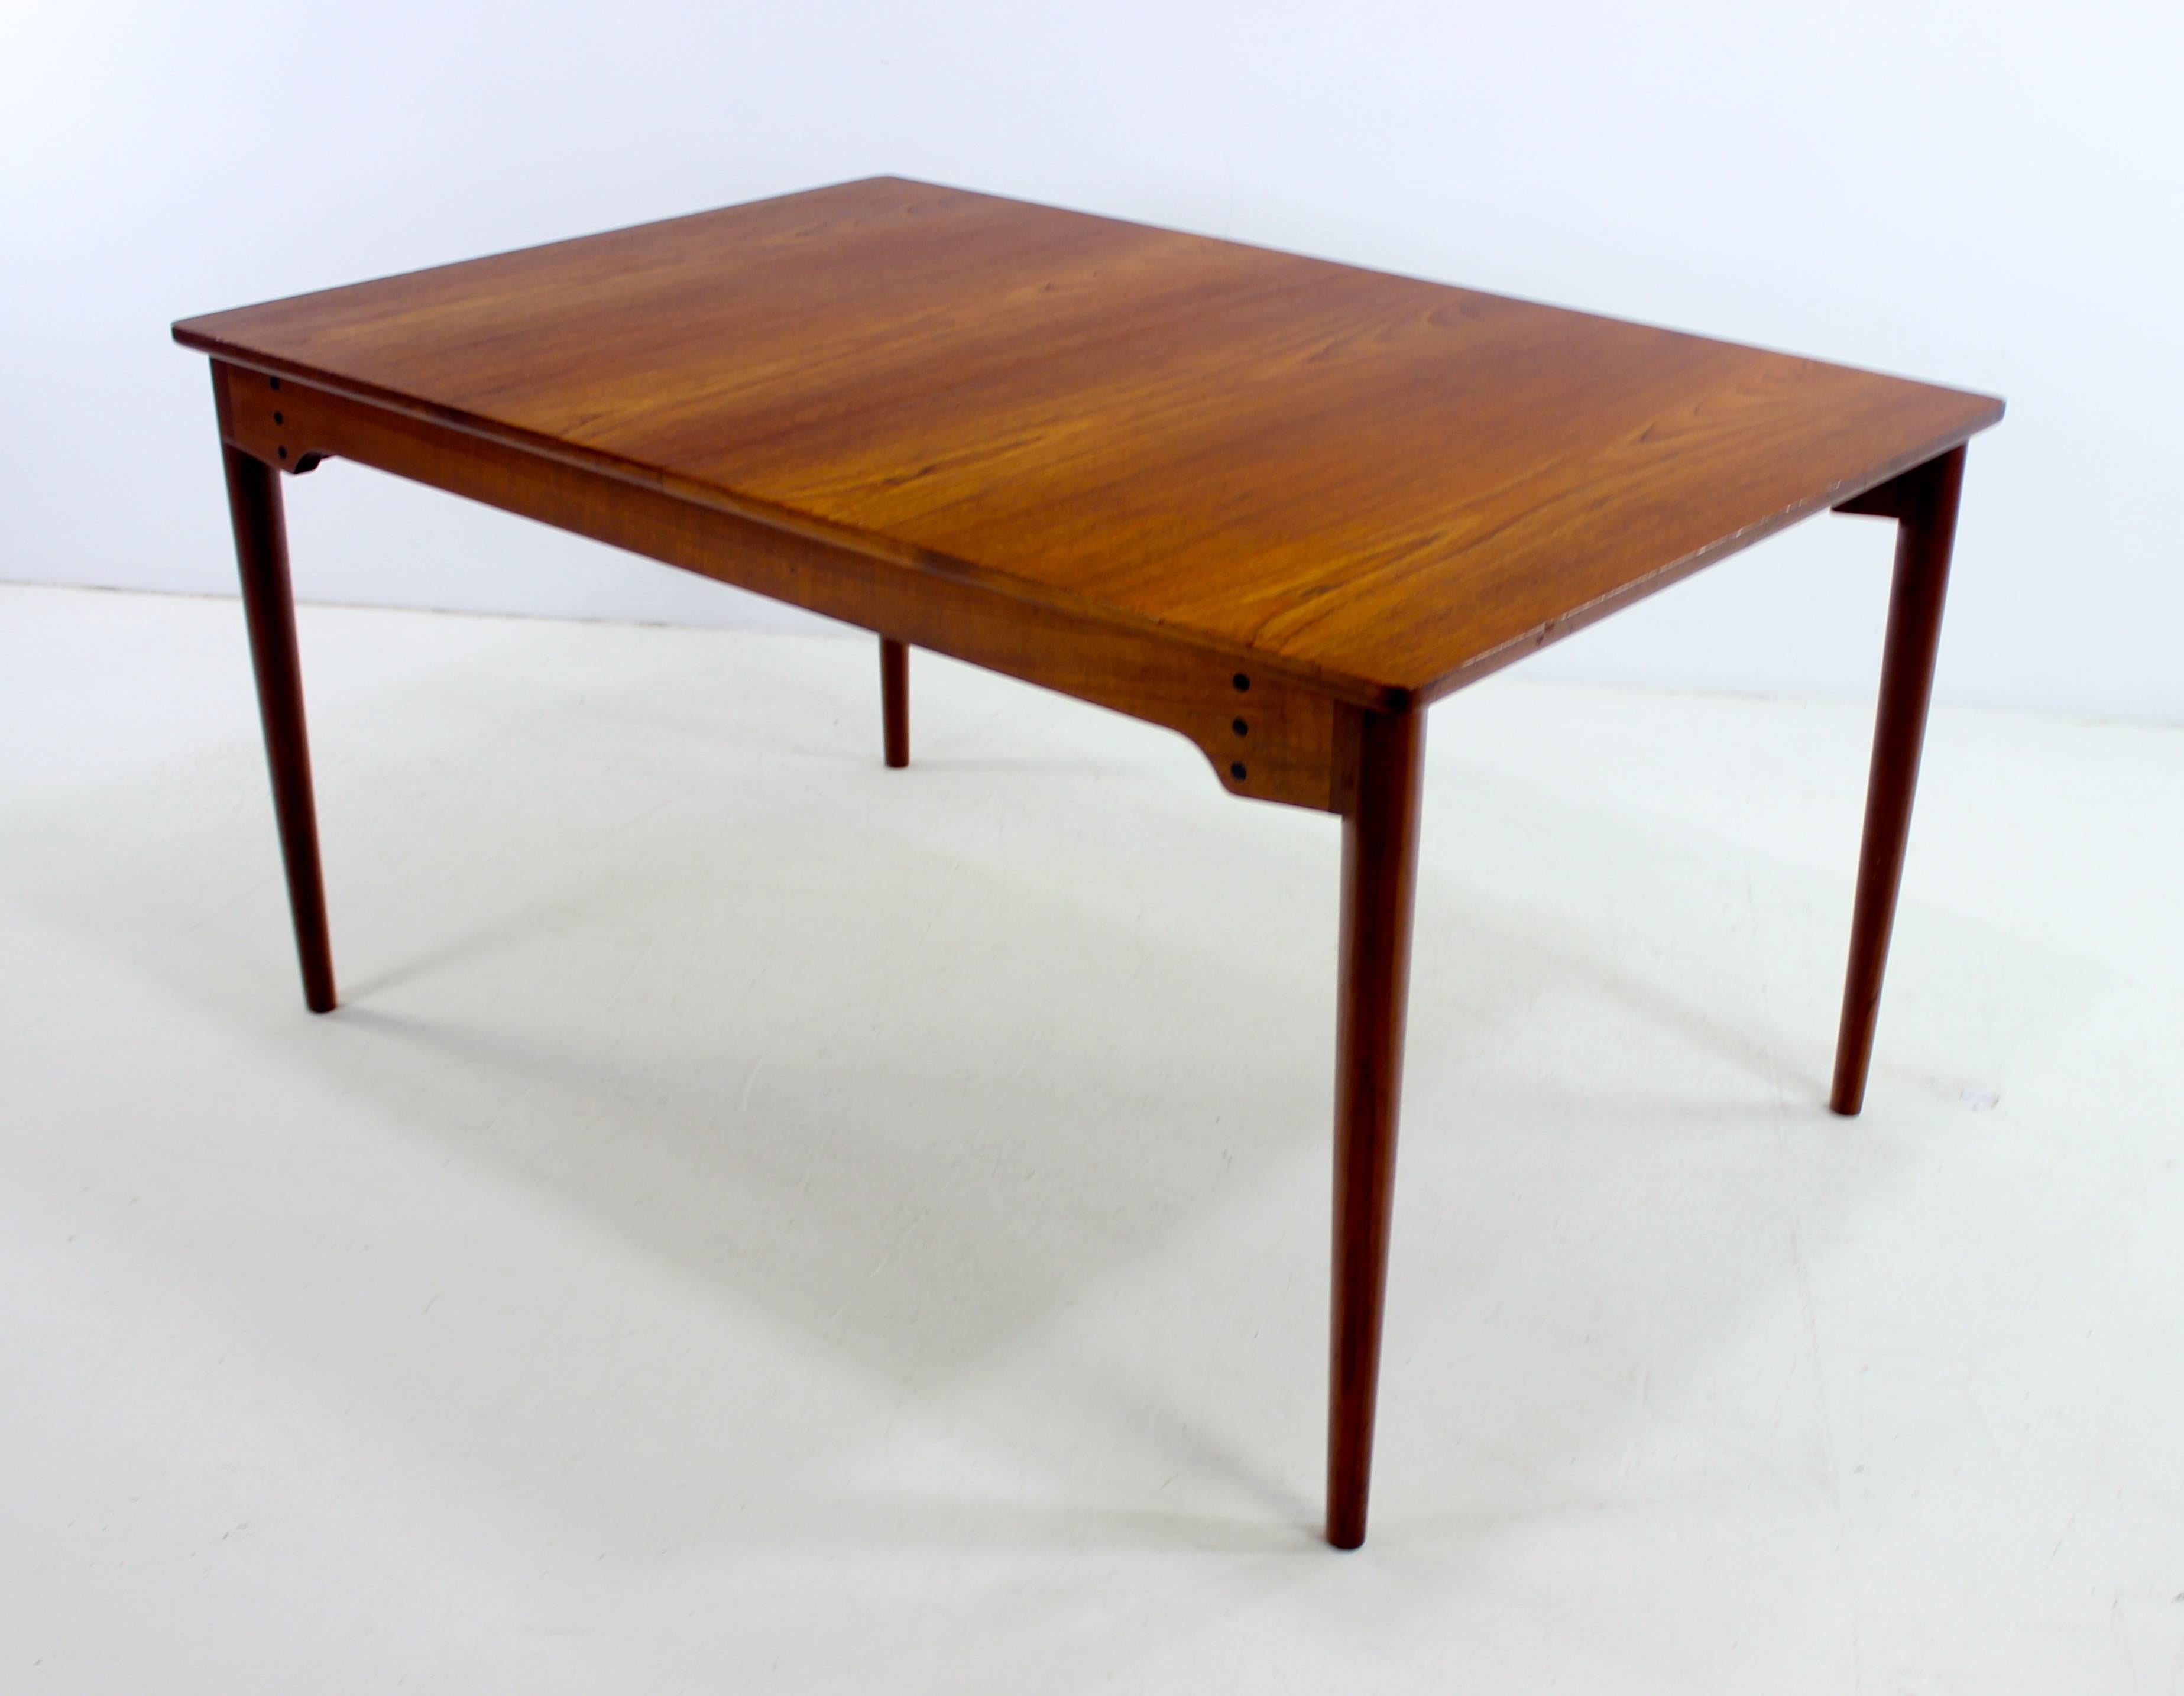 Danish Modern Teak Dining Table Designed by Finn Juhl In Excellent Condition For Sale In Portland, OR